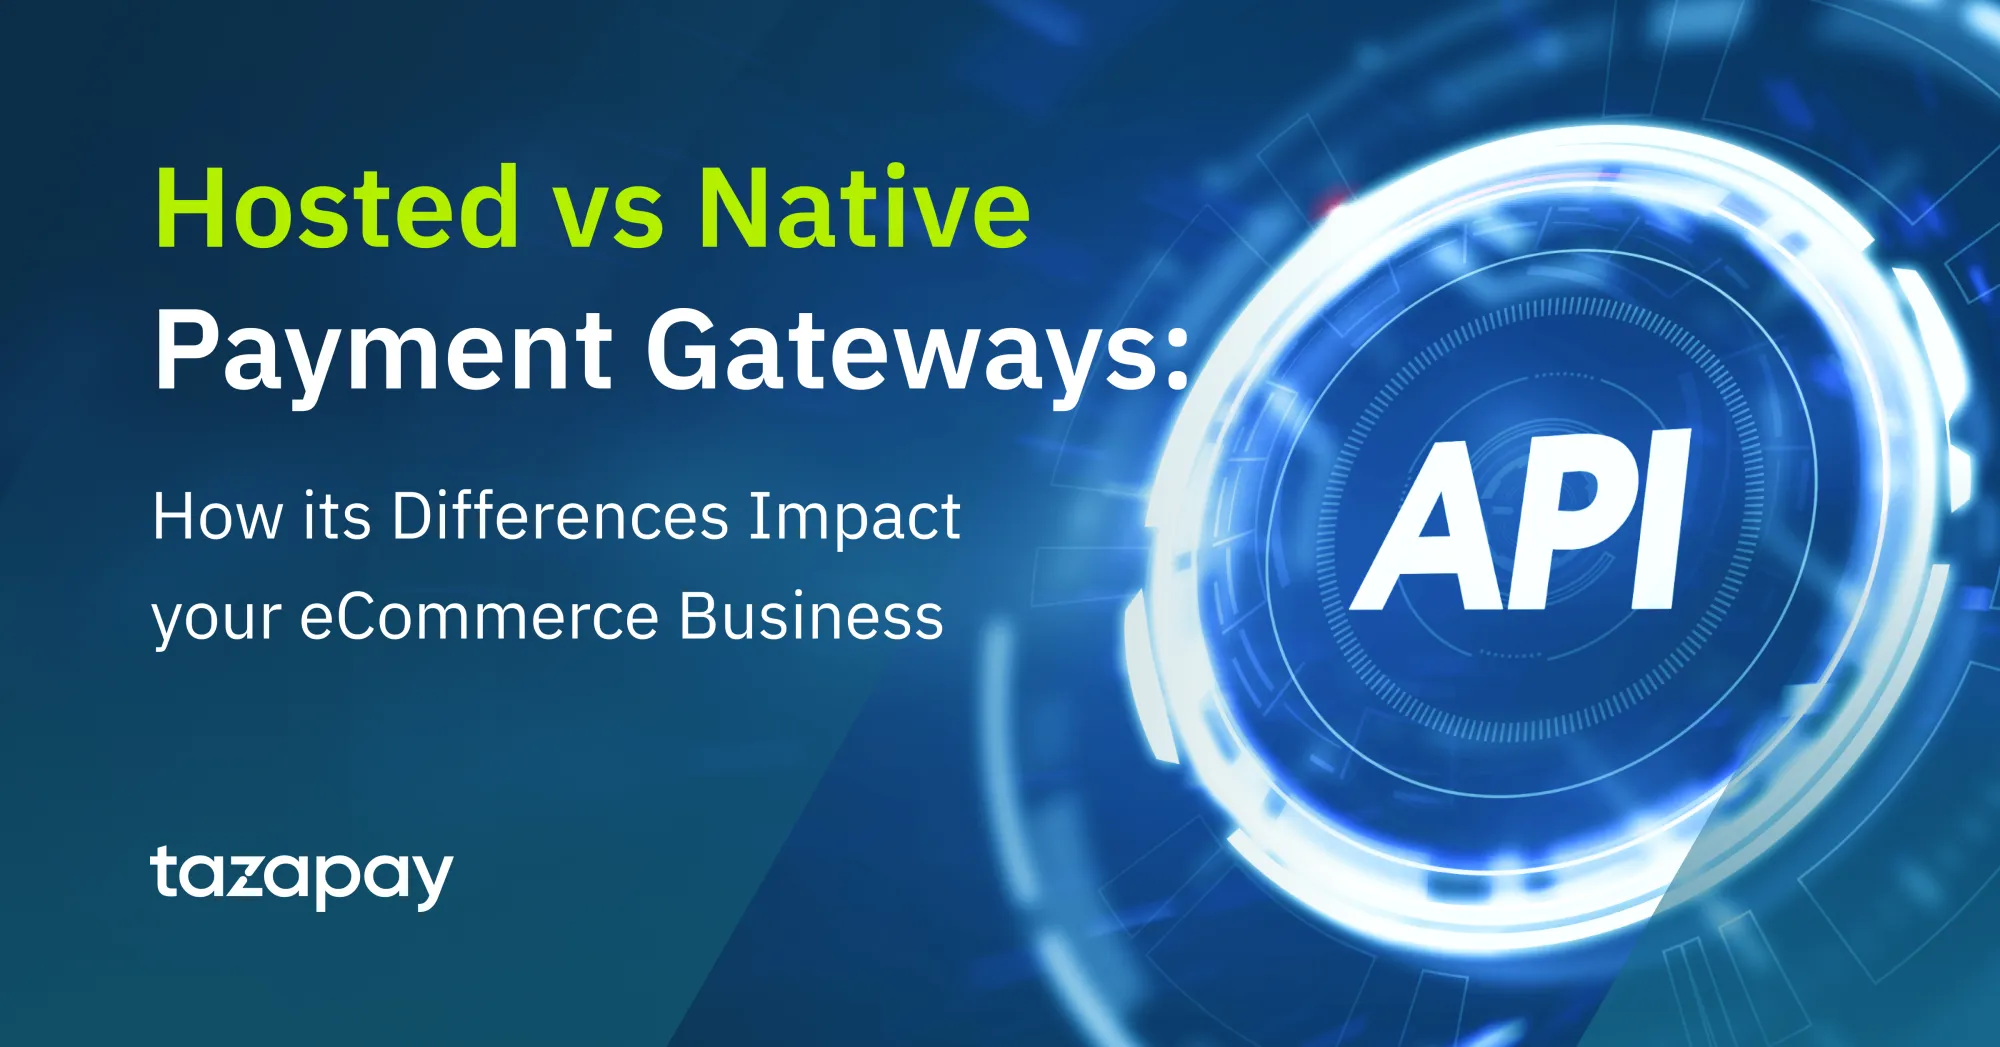 Hosted vs Native Payment Gateways: How its Differences Impact Your eCommerce Business